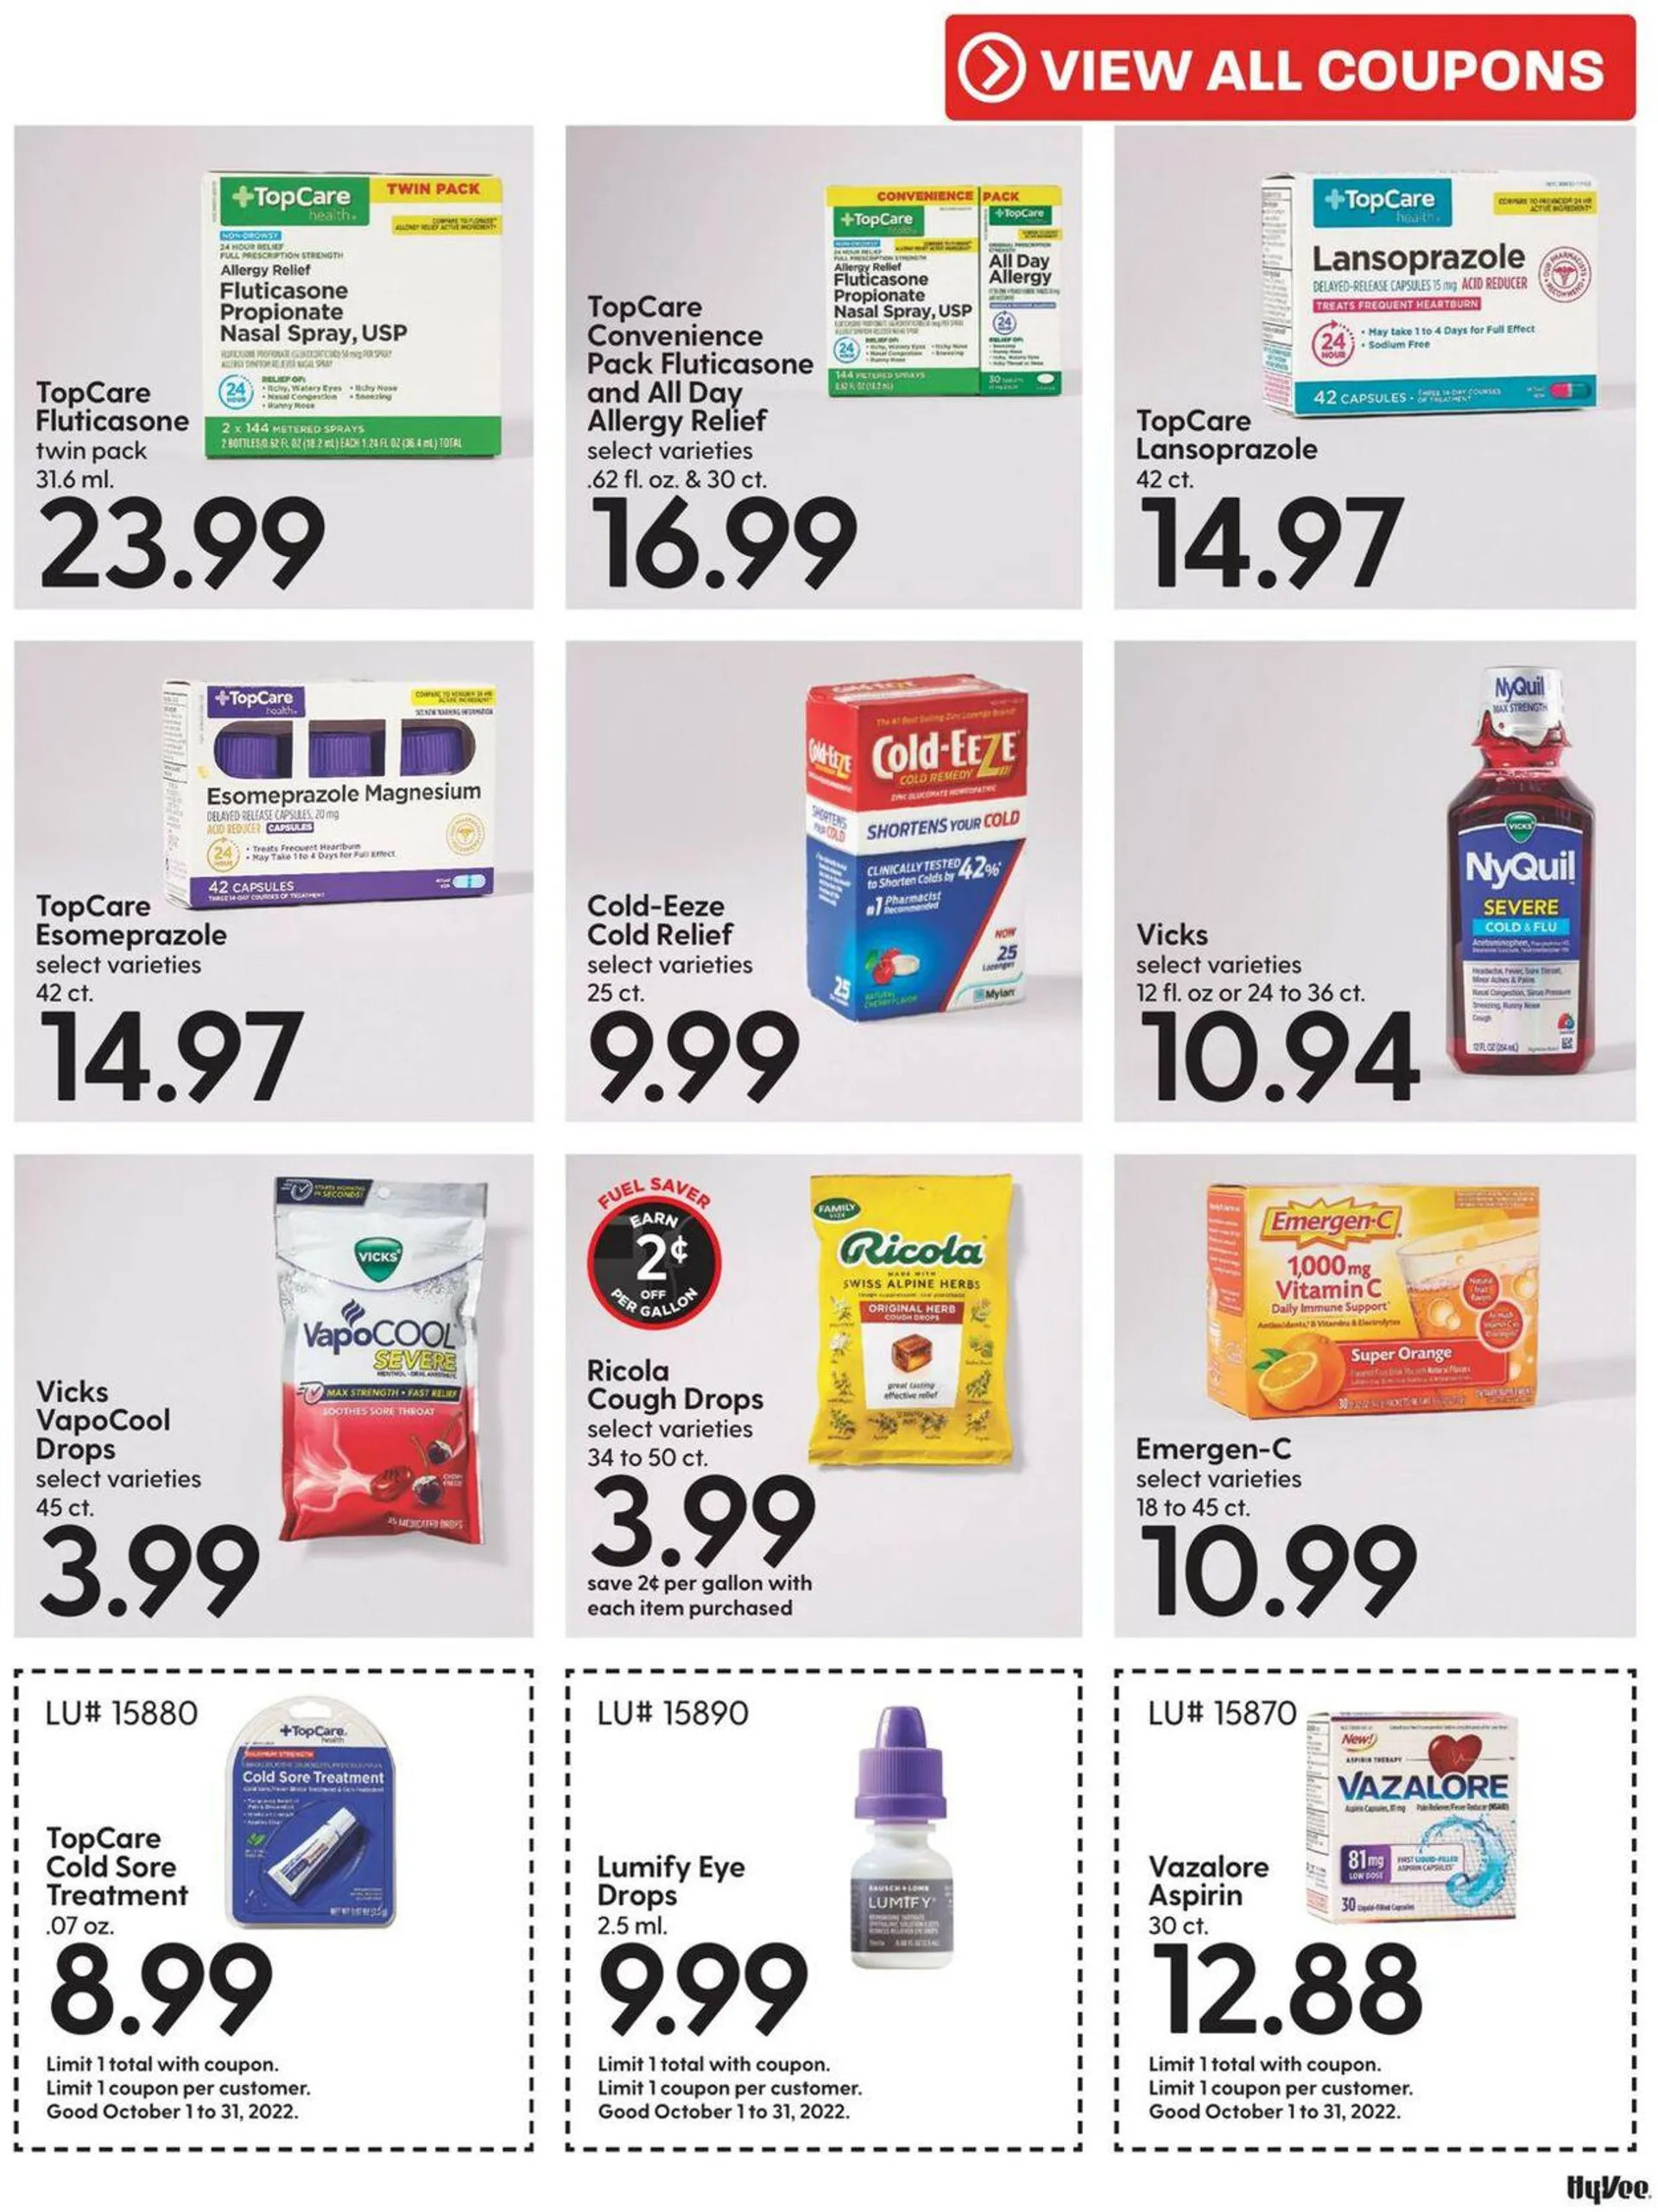 HyVee Current weekly ad - 77